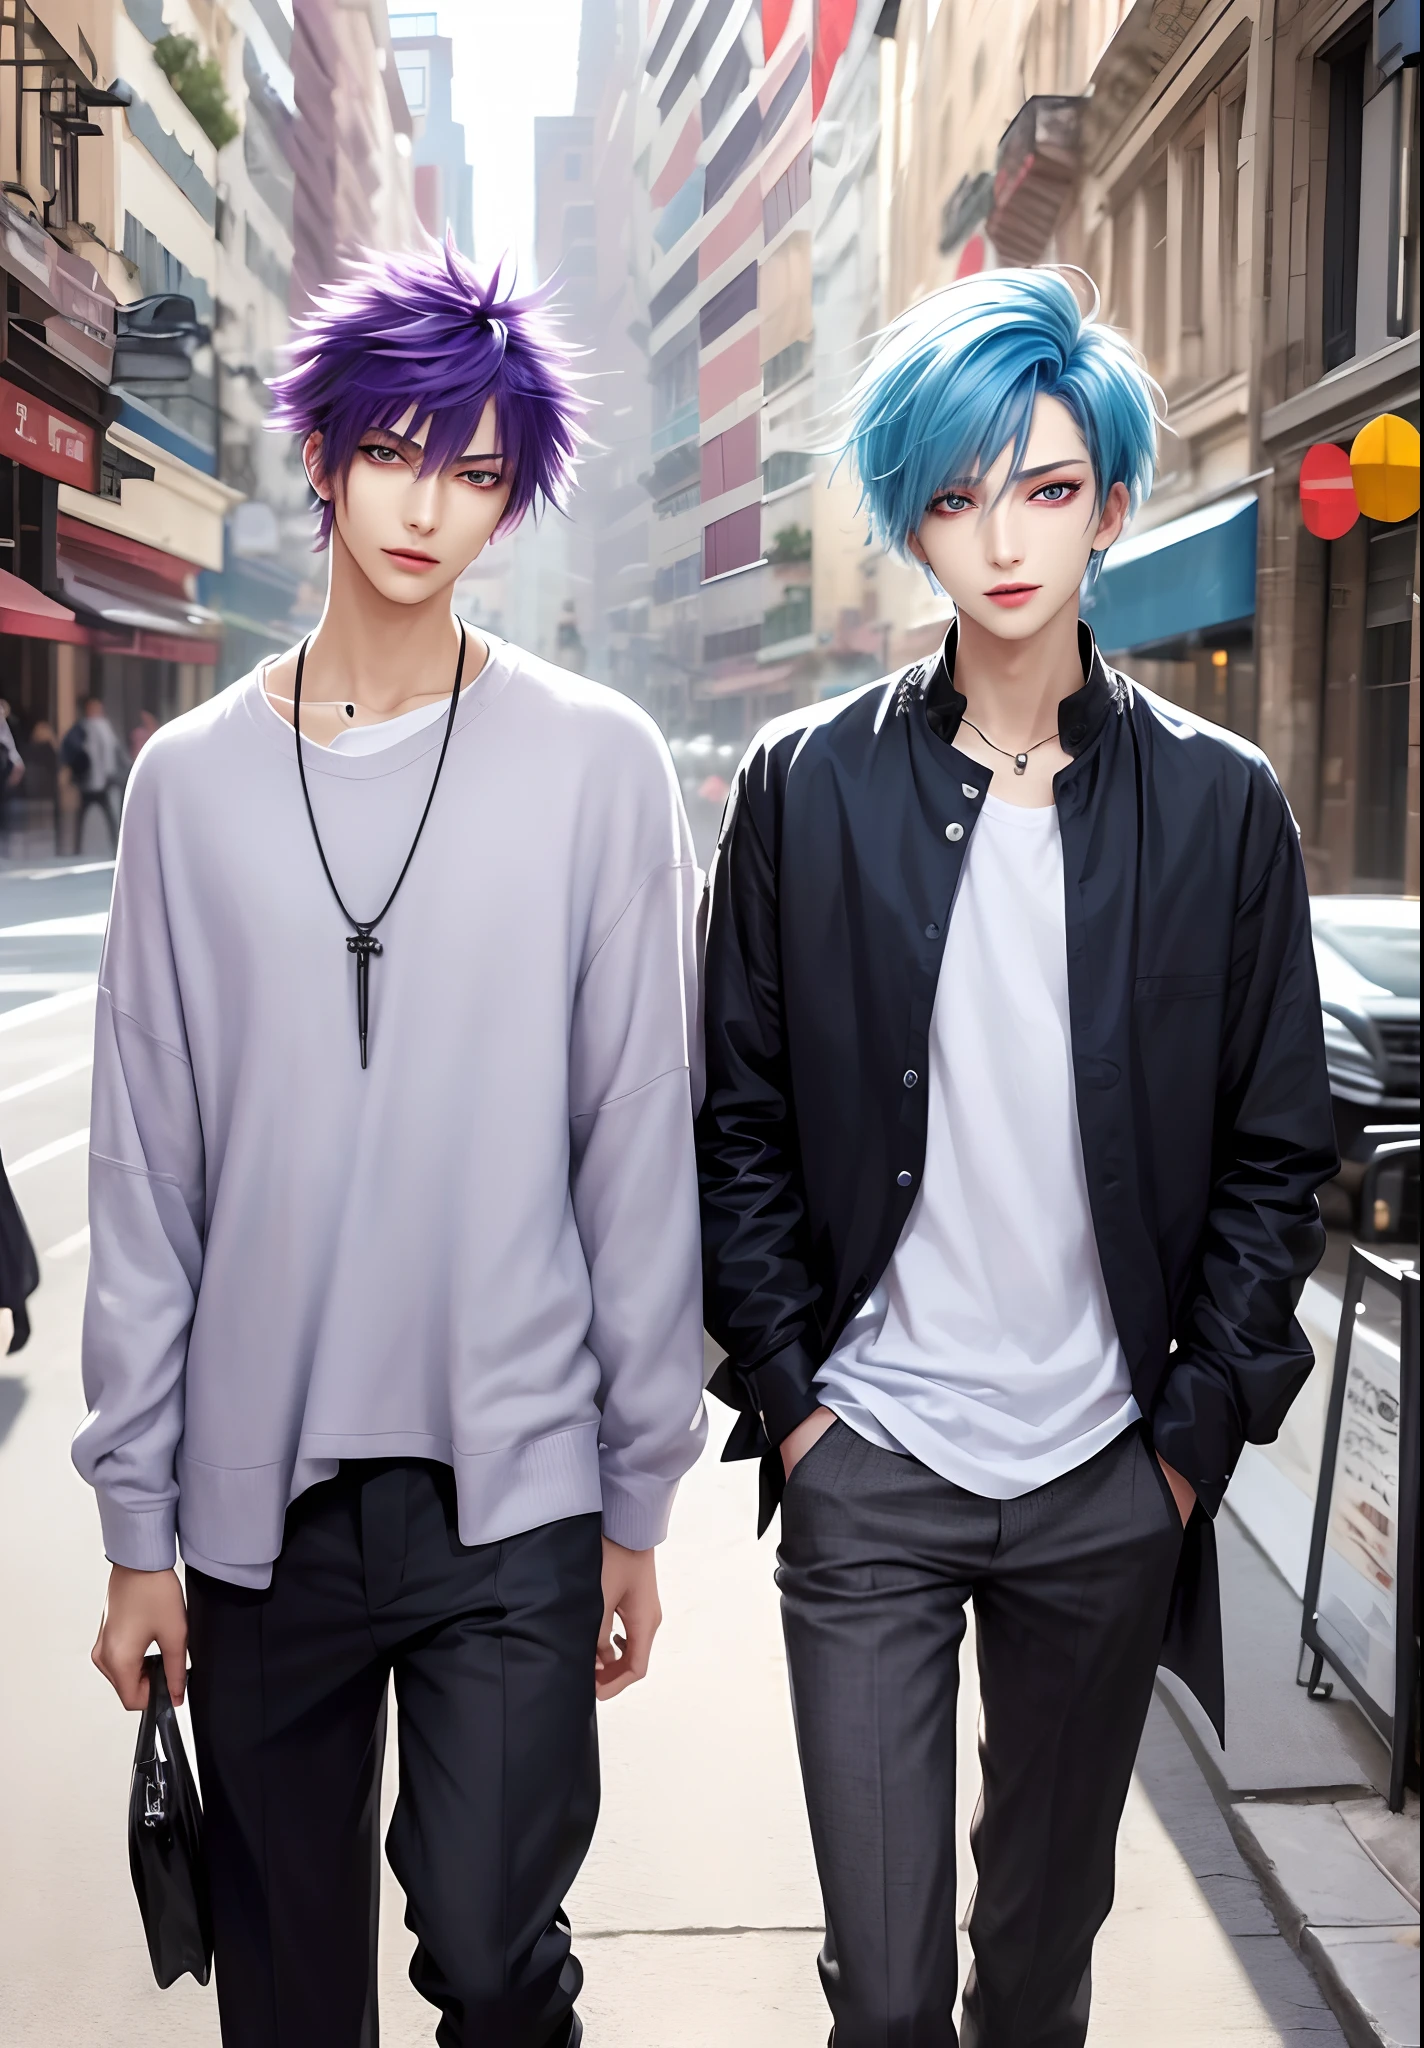 ​masterpiece, top-quality, 2Others, Male couple, 1 man and 1,, Adults, Height difference, different fashion, different color, finely eye and detailed face, intricate detailes, Casual clothing, Oversized shirt, Modern urban streets, A smile, Happiness, tenderness, queers, Boys Love, high-level image quality、 Two beautiful men、tall、The upper part of the body、nightfall、nighttime scene、𝓡𝓸𝓶𝓪𝓷𝓽𝓲𝓬、Korean Male, Idol Photos, k pop, Professional Photos, Vampires, Korean fashion in black and white, Fedoman with necklace, inspired by Sim Sa-jeong, androgynous vampire, :9 detailed face: 8, extra detailed face, detailed punk hair, ((eyes are brown)) baggy eyes, Seductive. Highly detailed, semi realistic anime, Vampires, hyperrealistic teen, delicate androgynous prince, imvu, short hair above the ears, Man with short hair, With a purple-haired man with a wild expression, Man with light blue hair with gentle expression, ((With a short-haired man with bright purple hair)), ((Man with light blue hair))